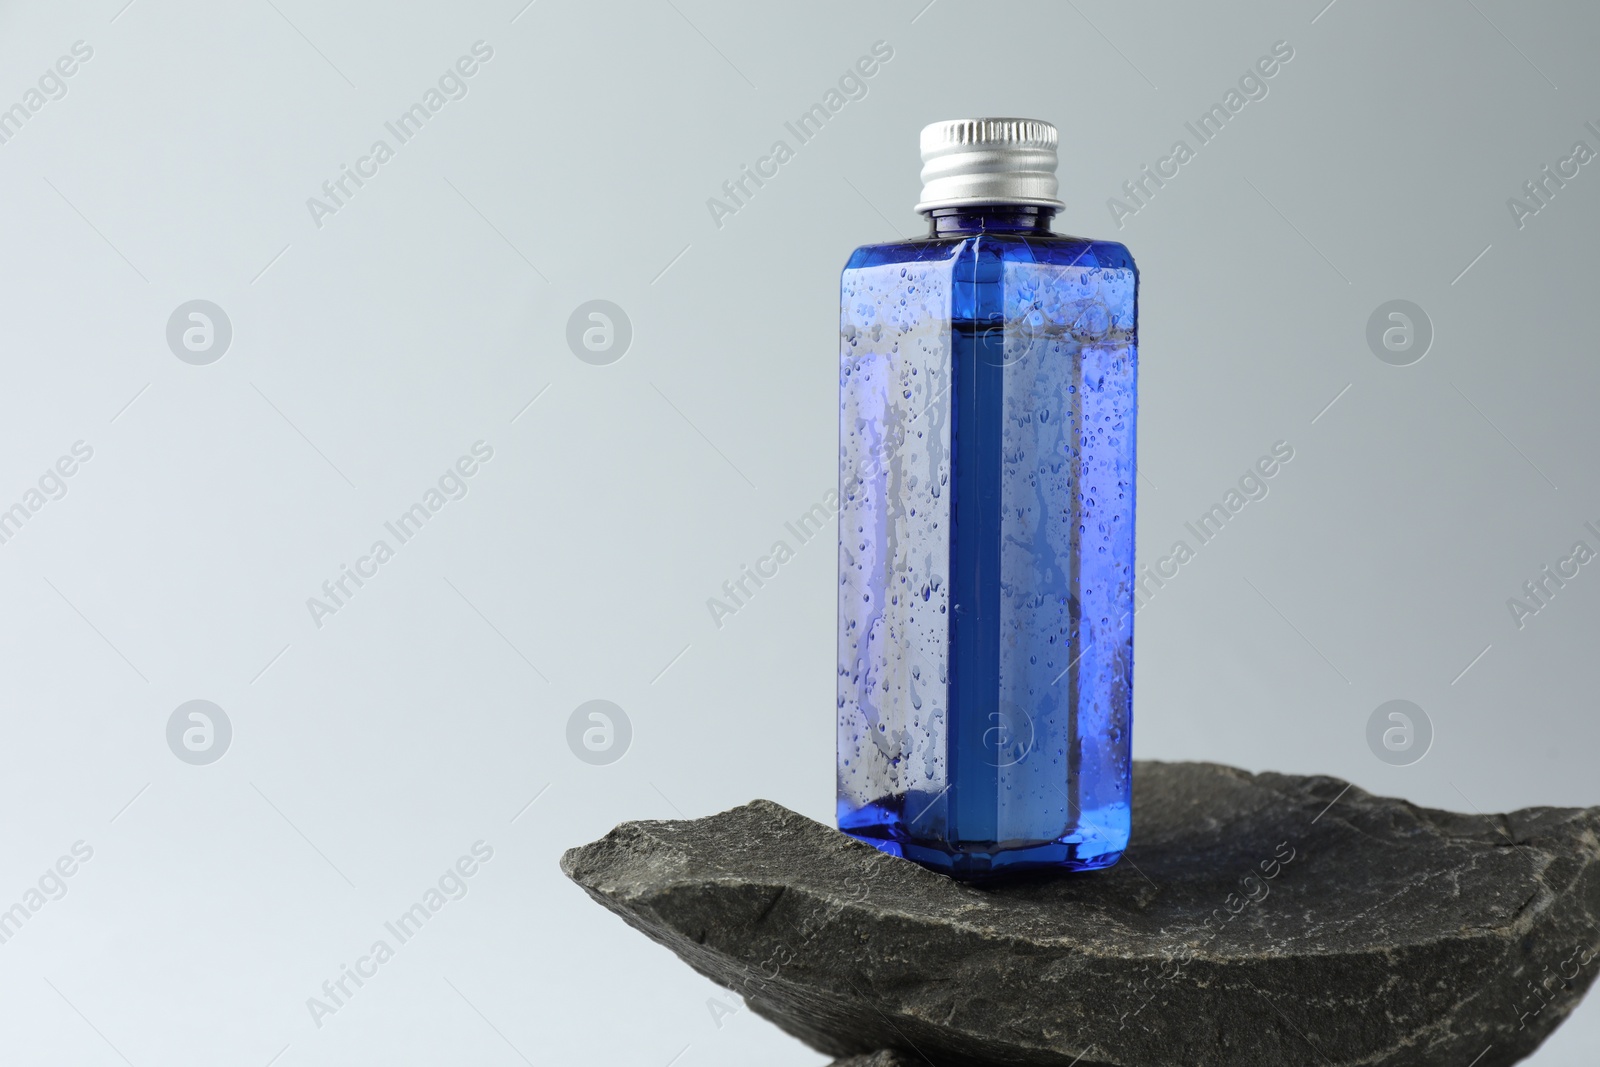 Photo of Bottle of cosmetic product on stone against light grey background, space for text